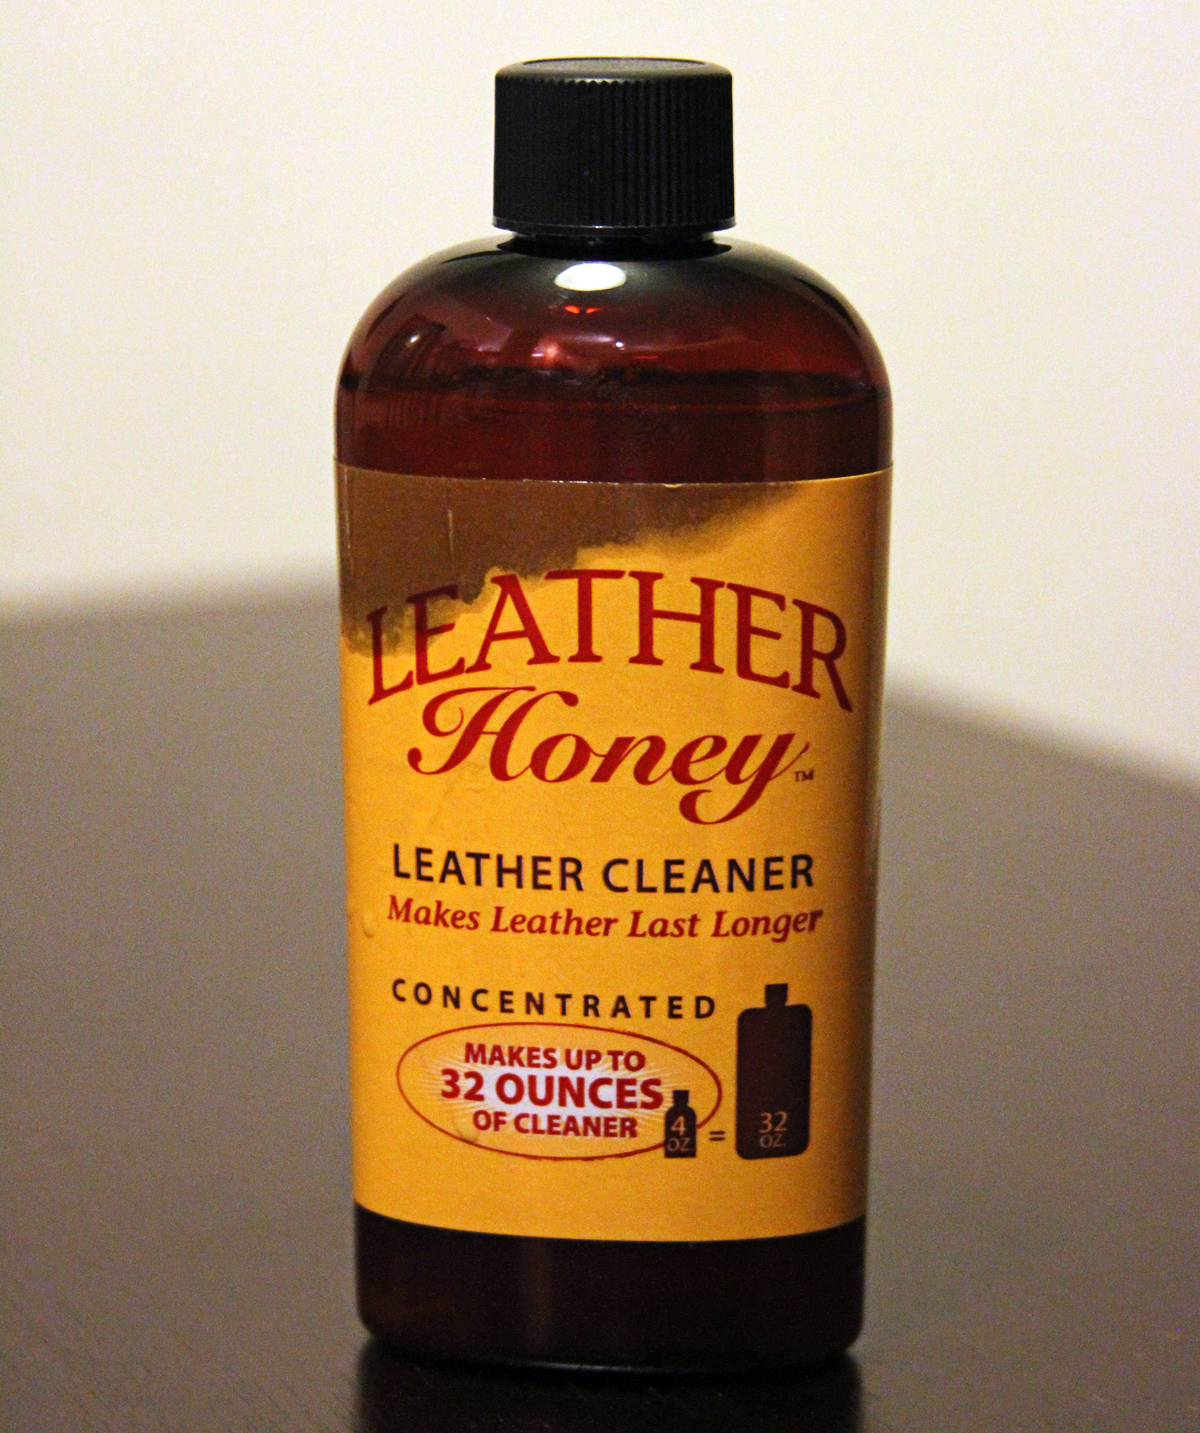 Leather Honey Leather Care Kit Review [Keep It Clean]